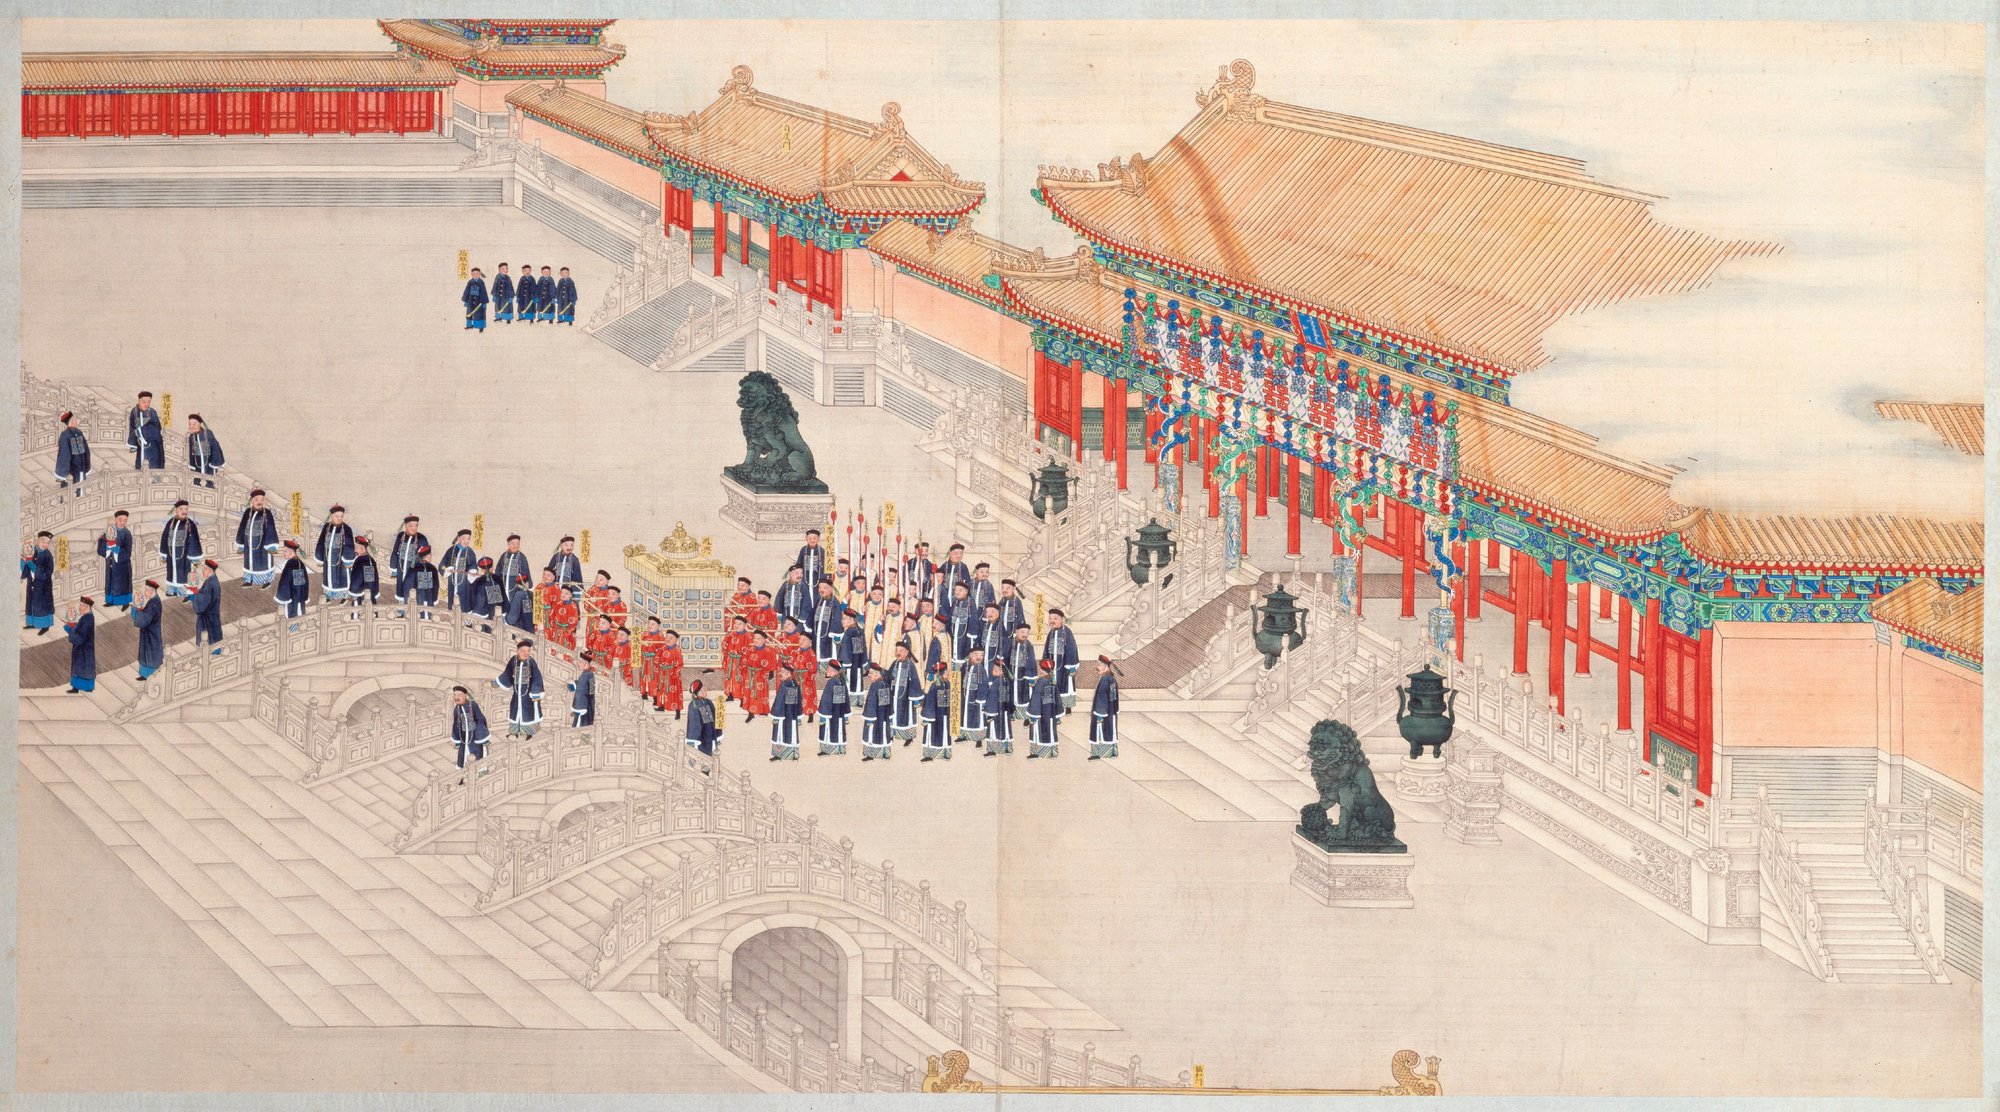 Enjoy a special visit to the Palace Museum